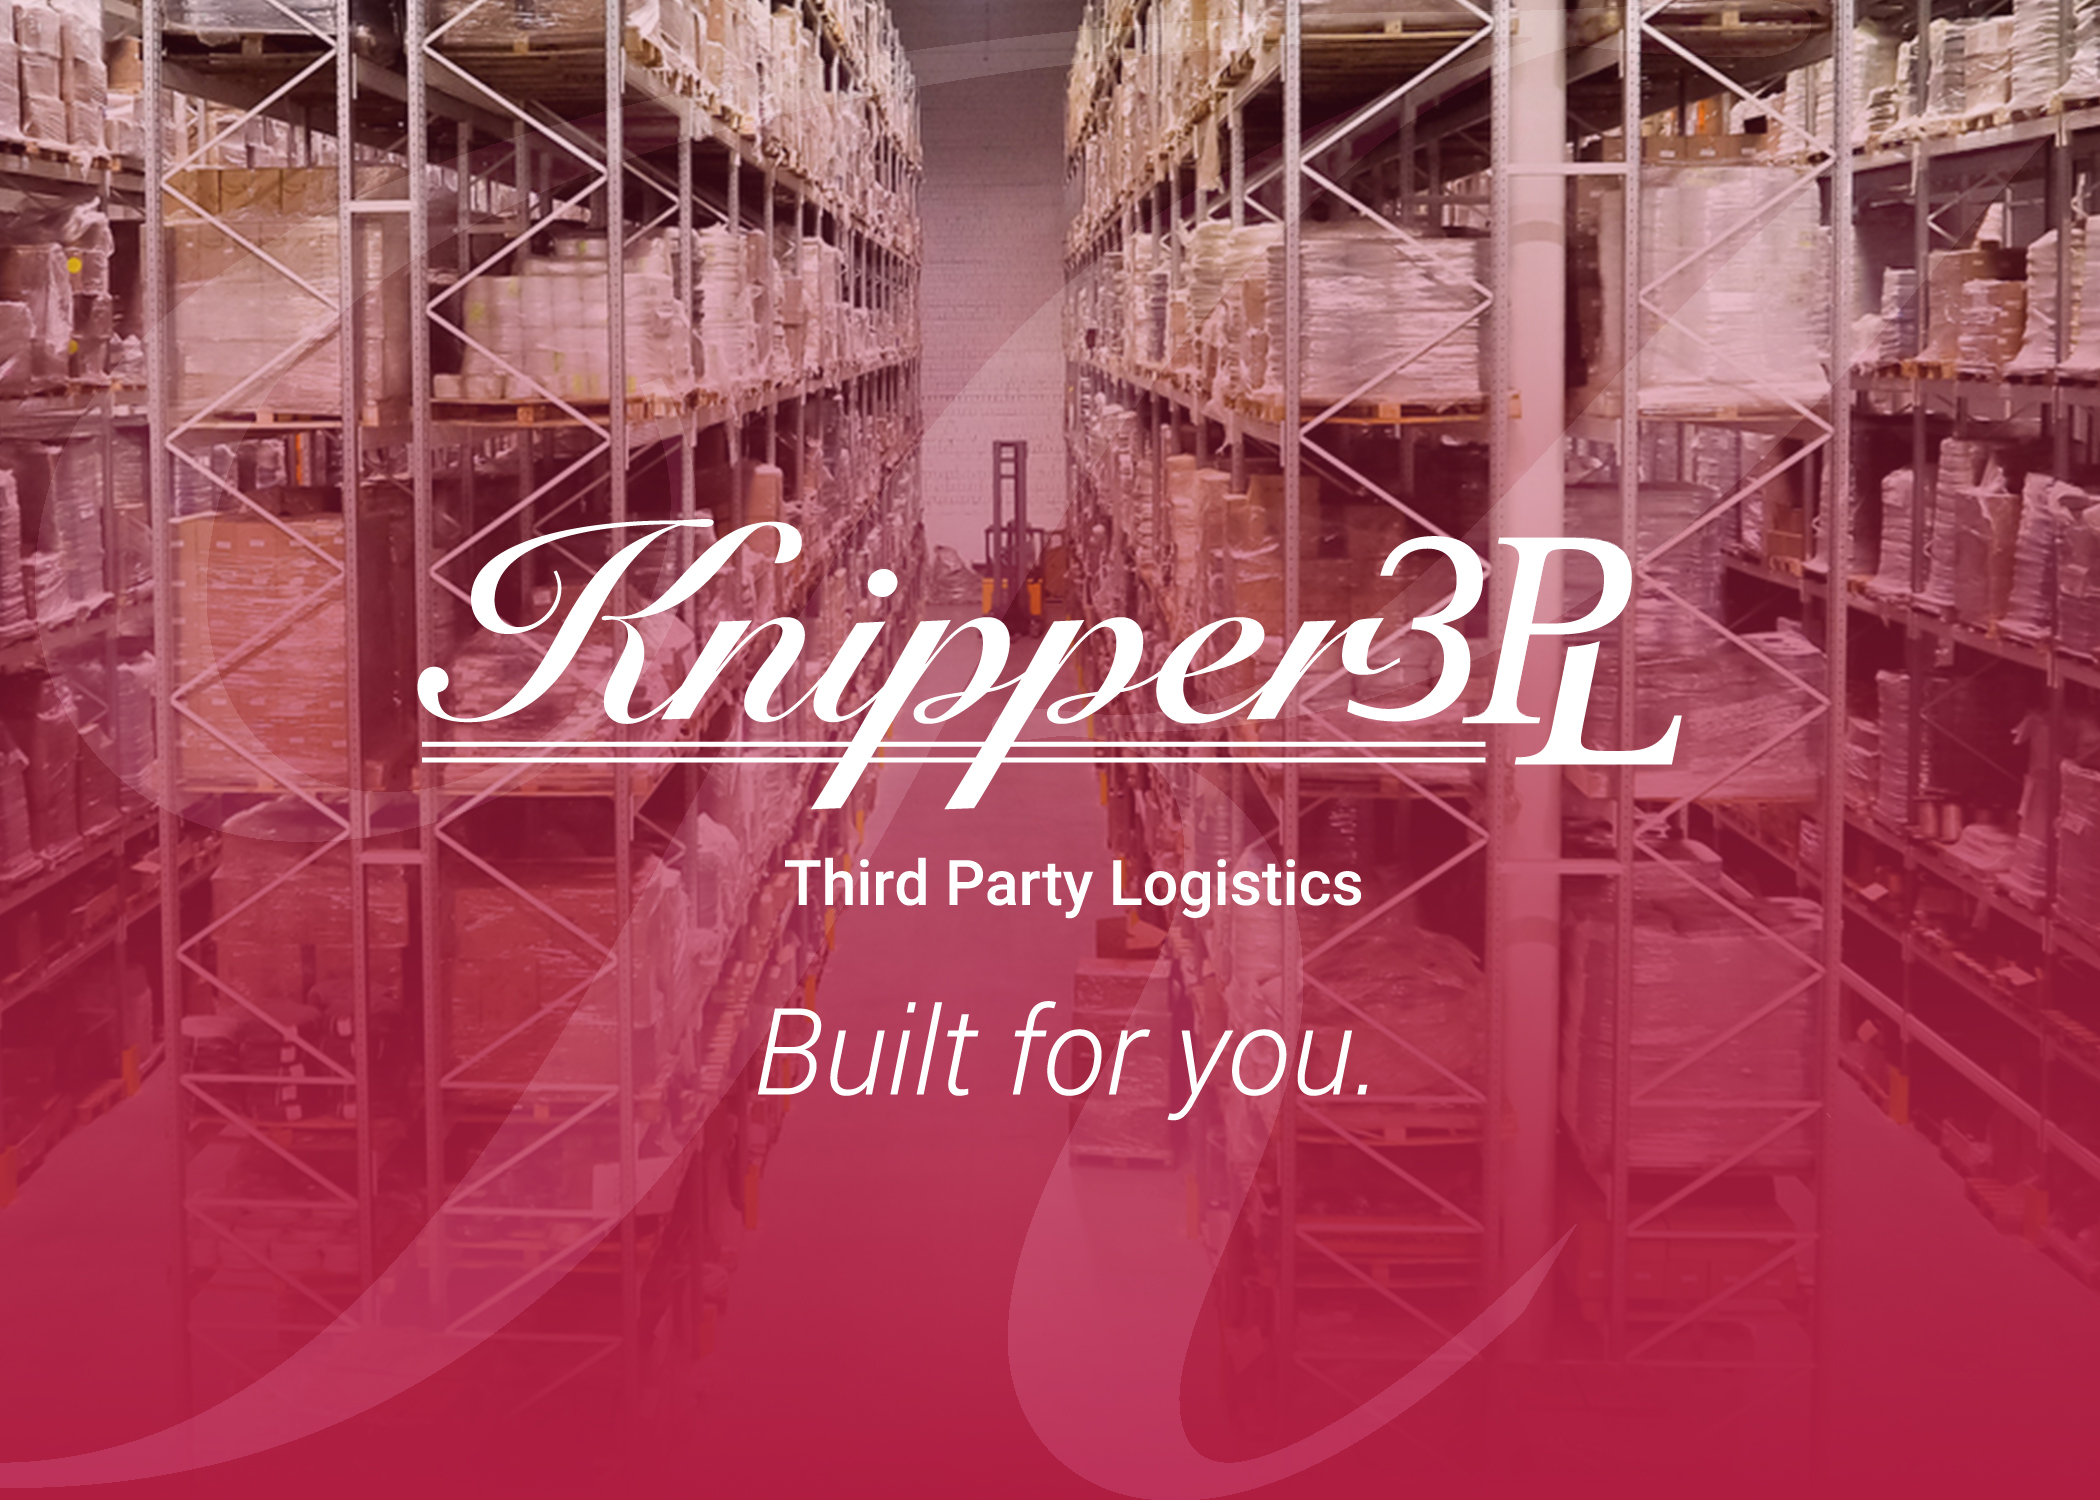 Many additional services available from Knipper 3PL are product launch commercialization, Alternative Distribution Models and Direct to Patient Models.